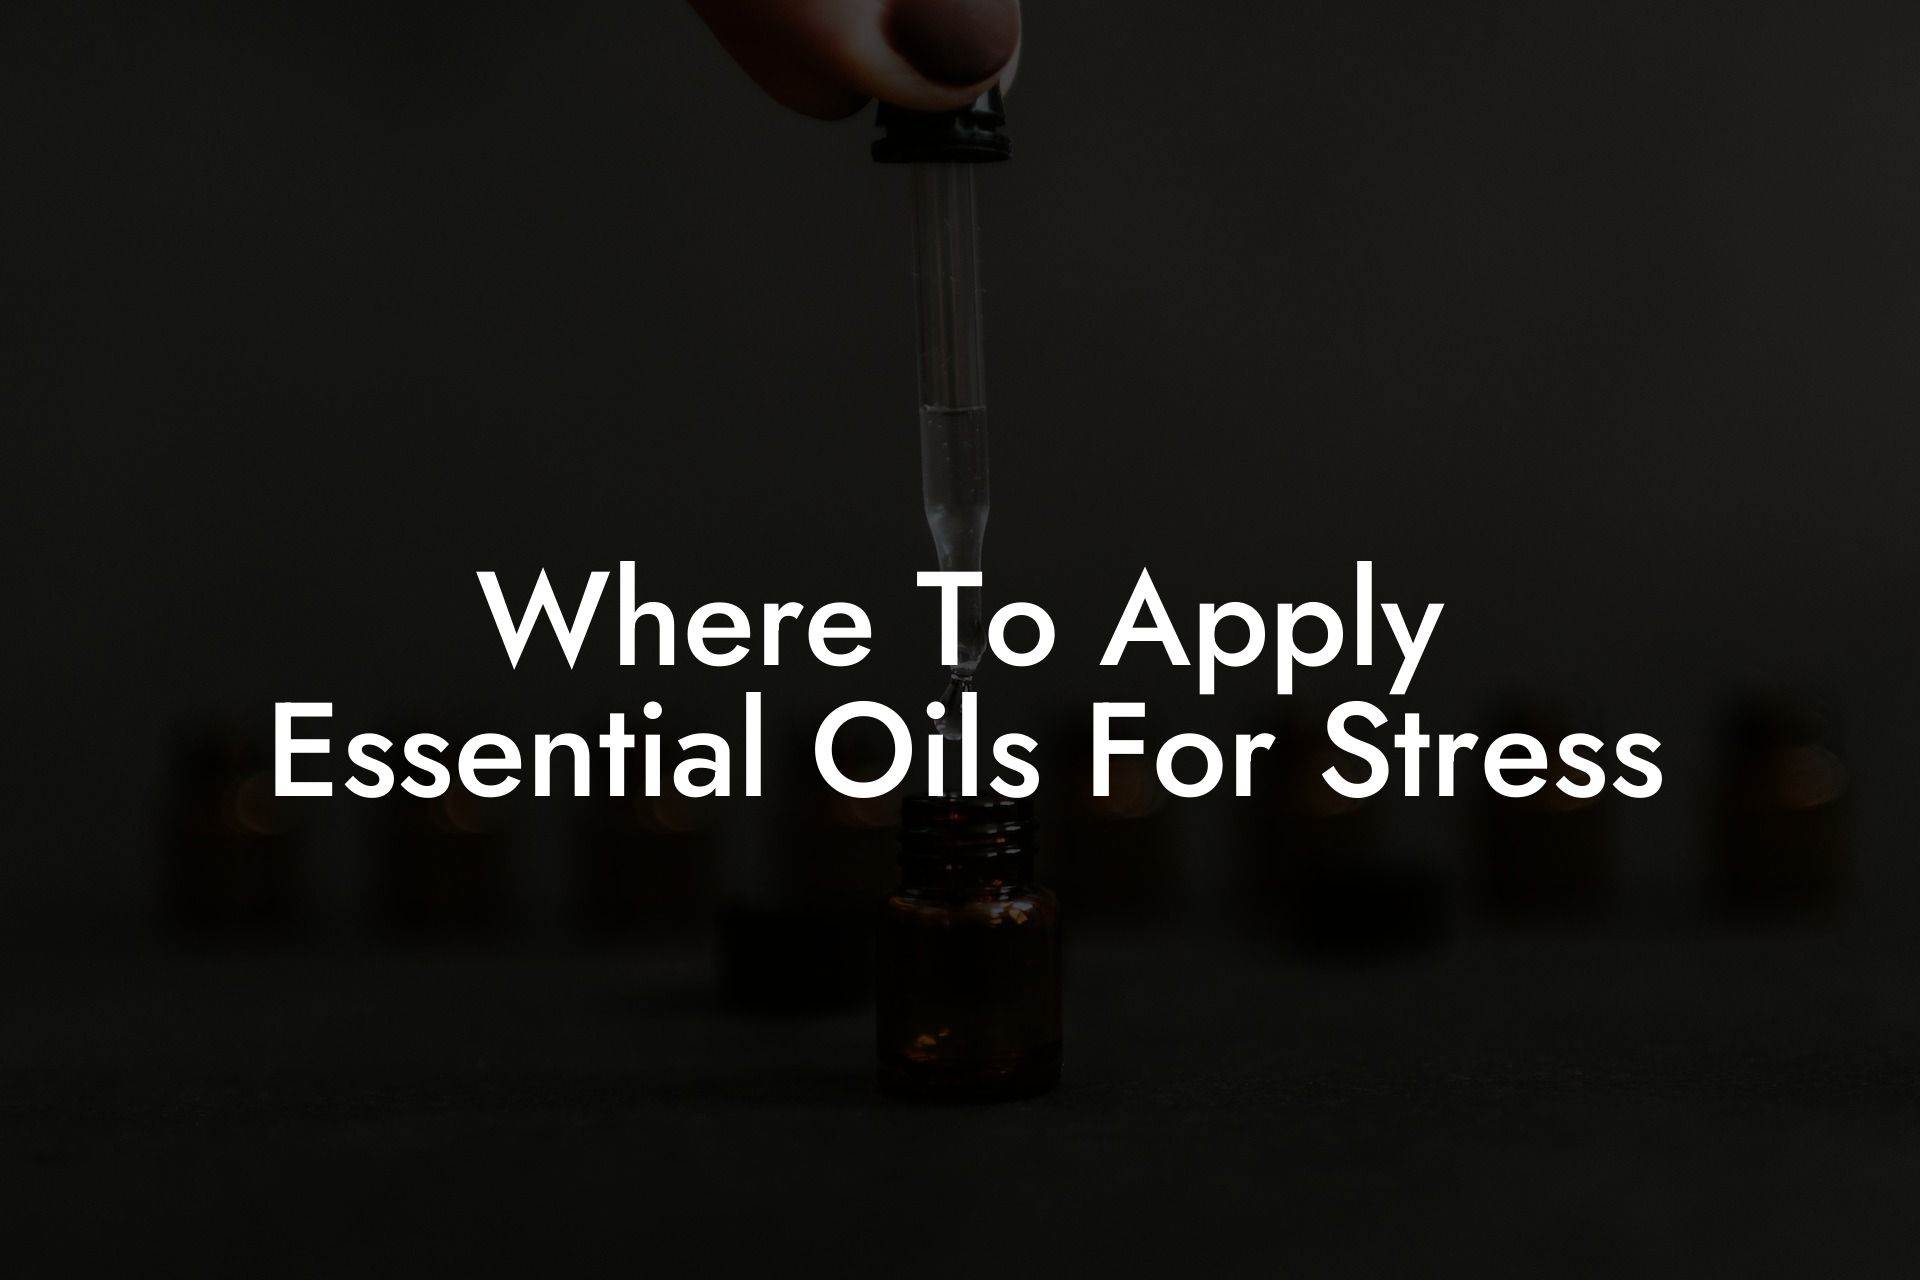 Where To Apply Essential Oils For Stress